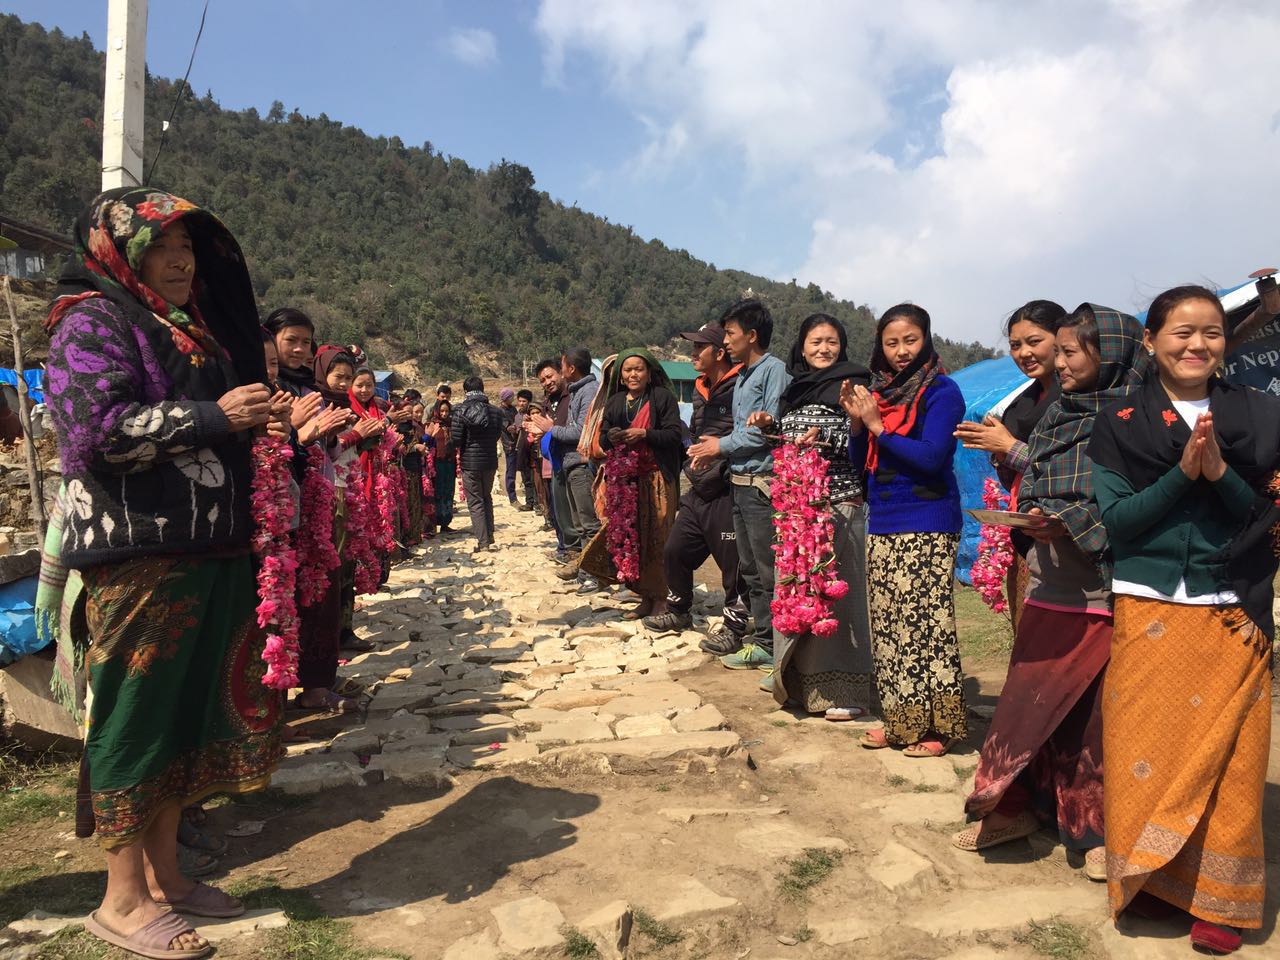 A rousing welcomed by the Laprak villagers.